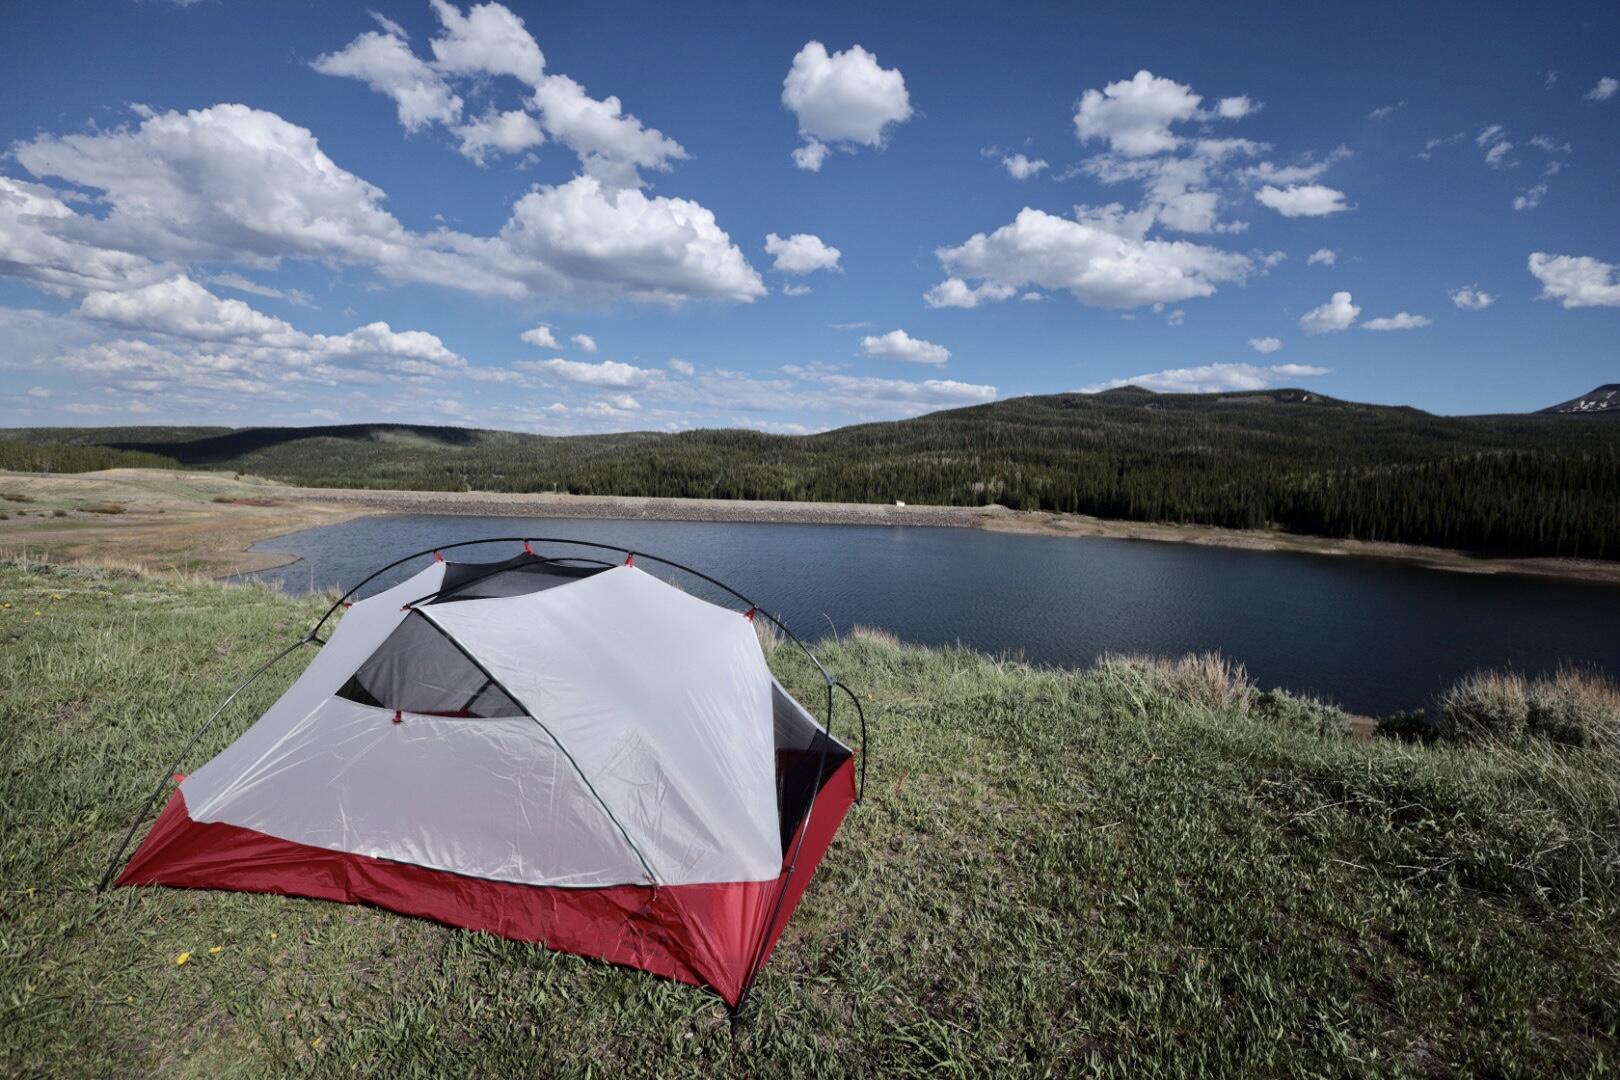 msr-mutha-hubba-nx-review-the-best-3-person-tent-money-can-buy